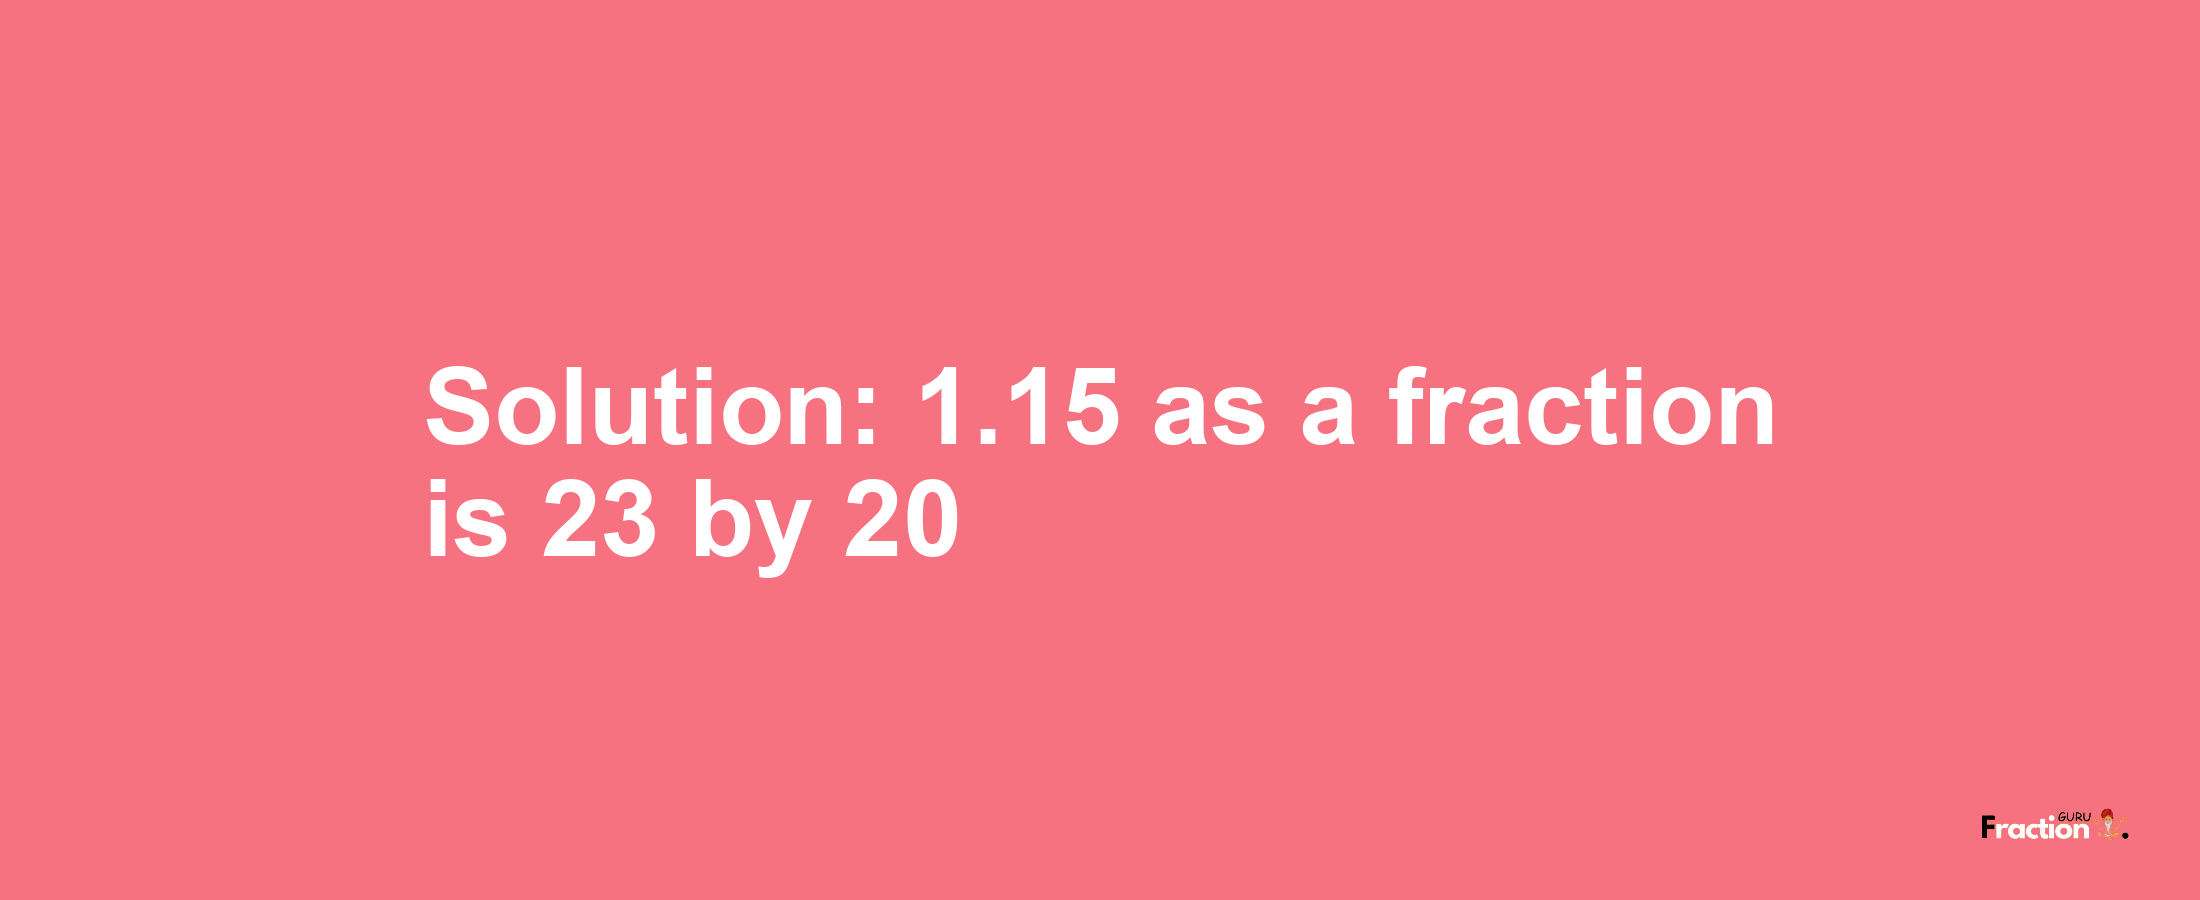 Solution:1.15 as a fraction is 23/20